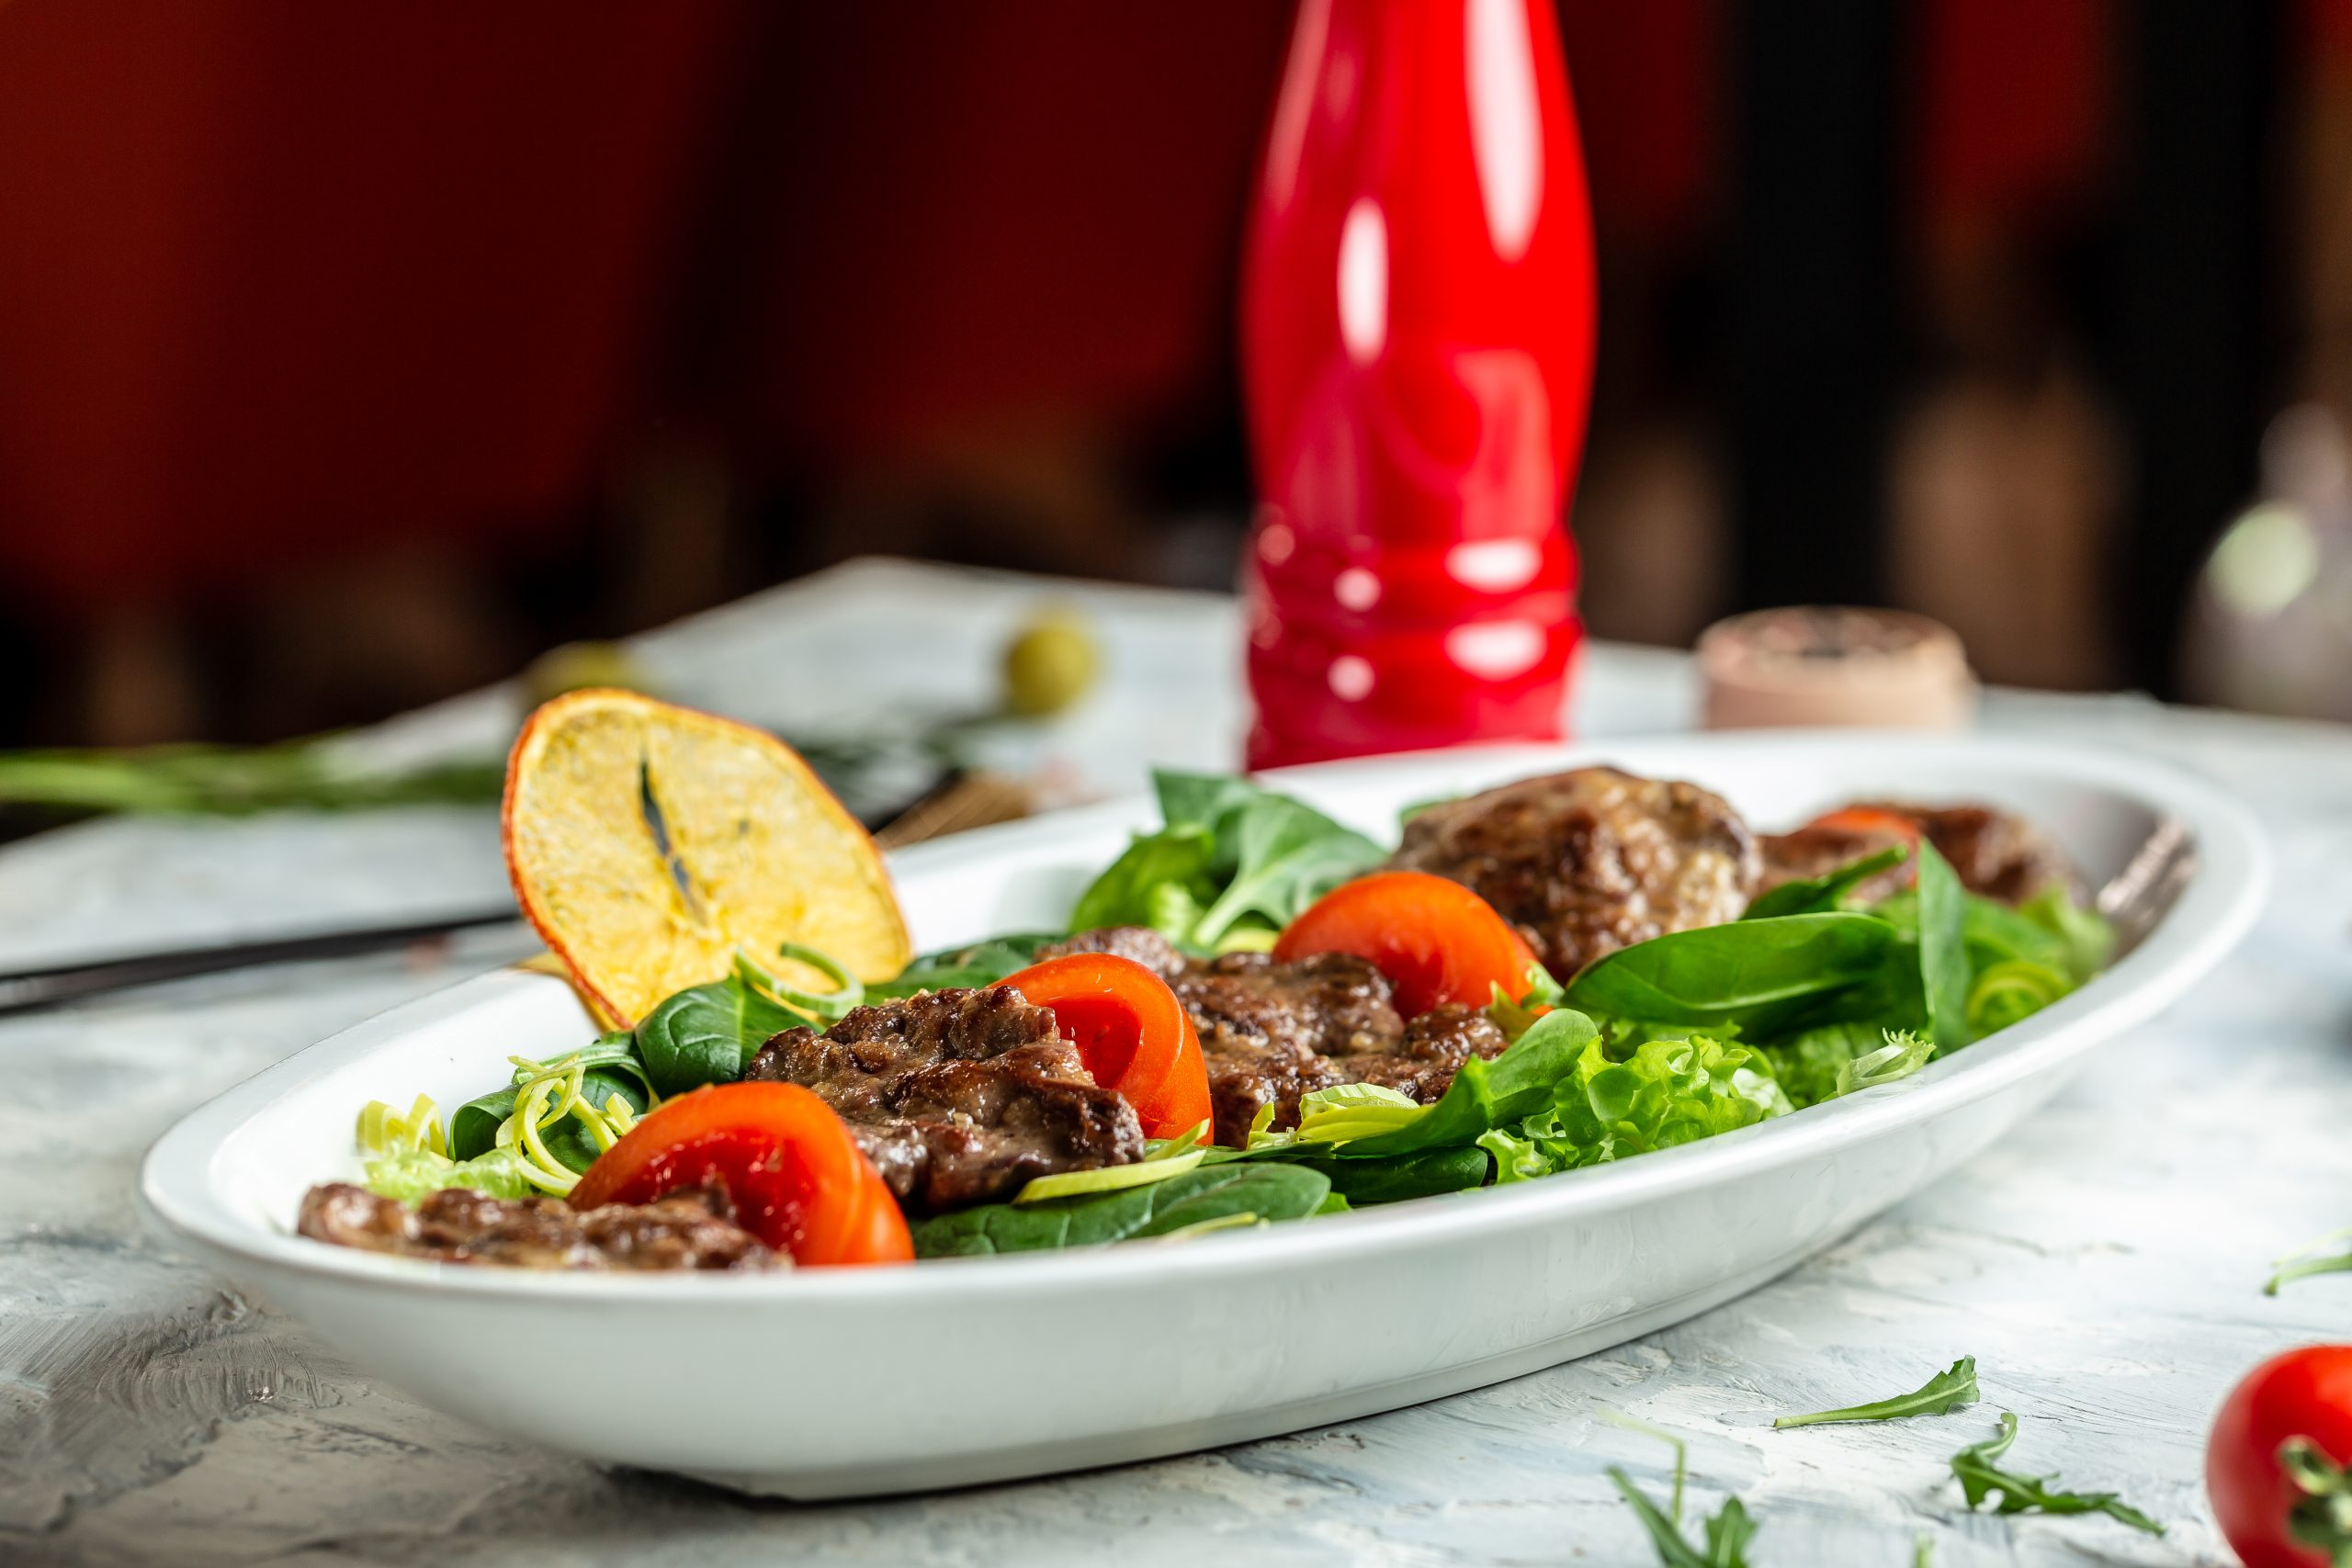 A healthy and vibrant South Beach Diet recipes featuring a baby spinach salad with tender beef liver and fresh tomato slices, garnished with a lemon slice and dressed in balsamic reduction.